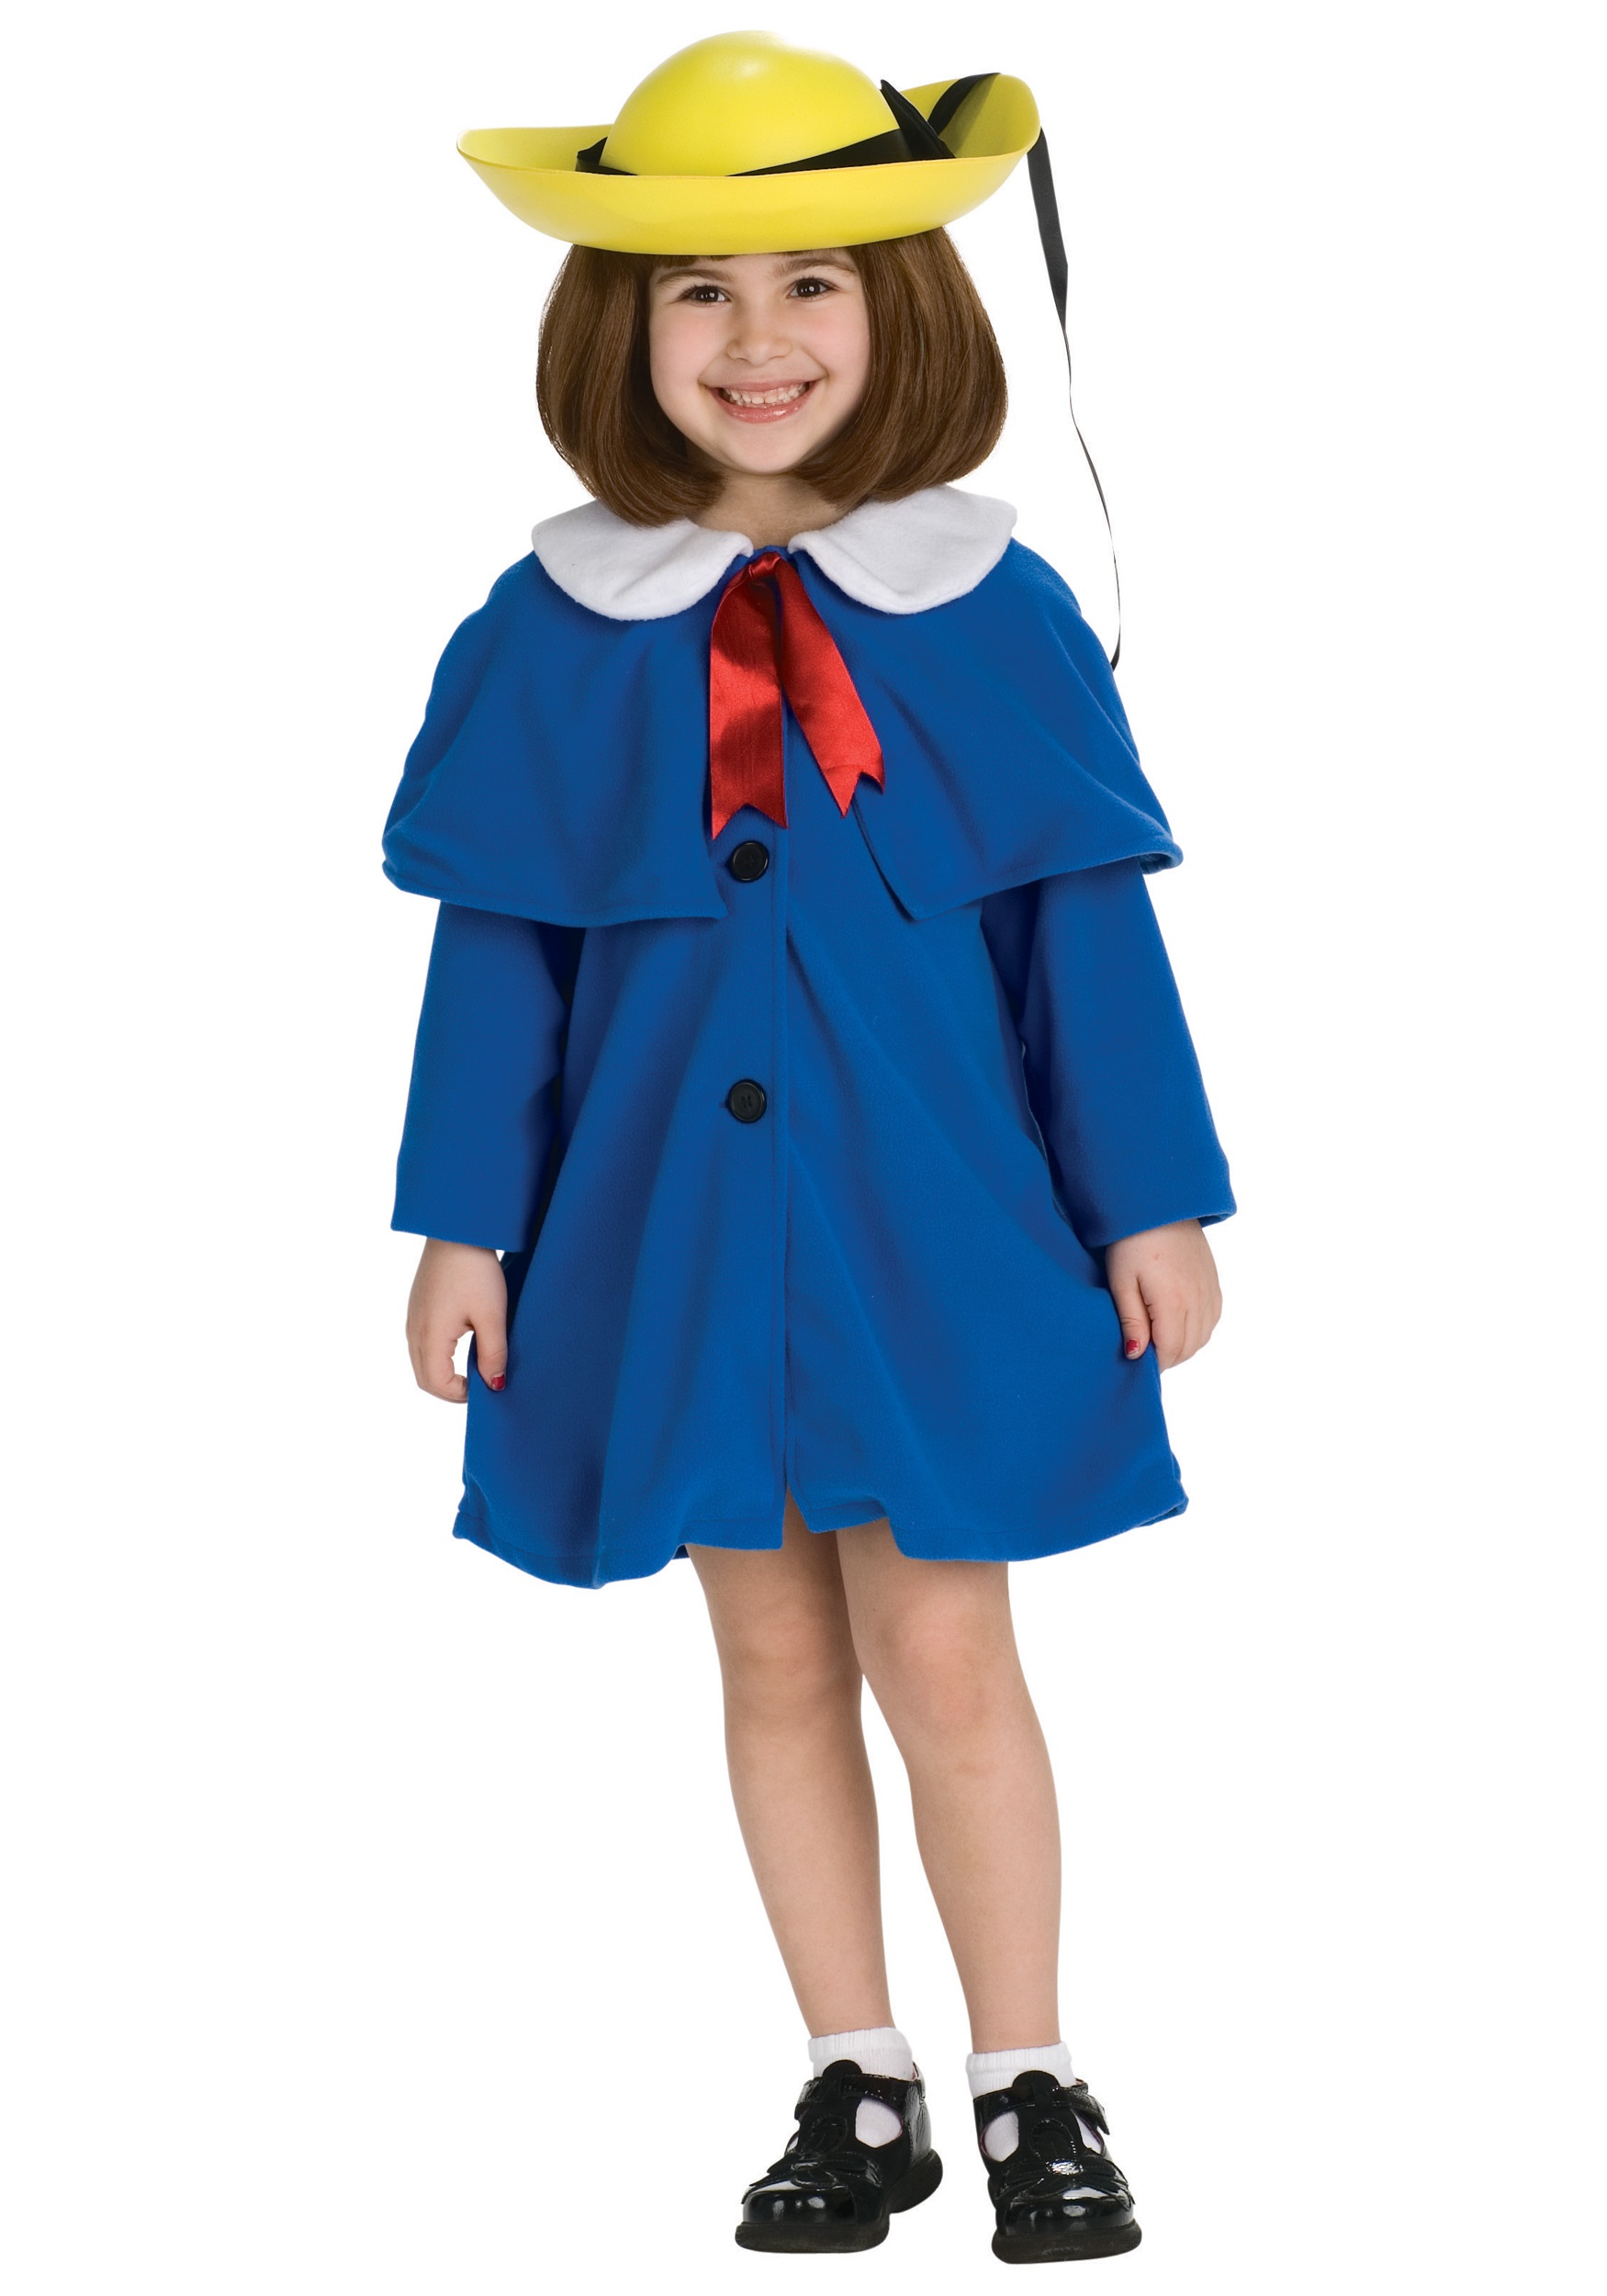 Gallery For > Madeline Costume